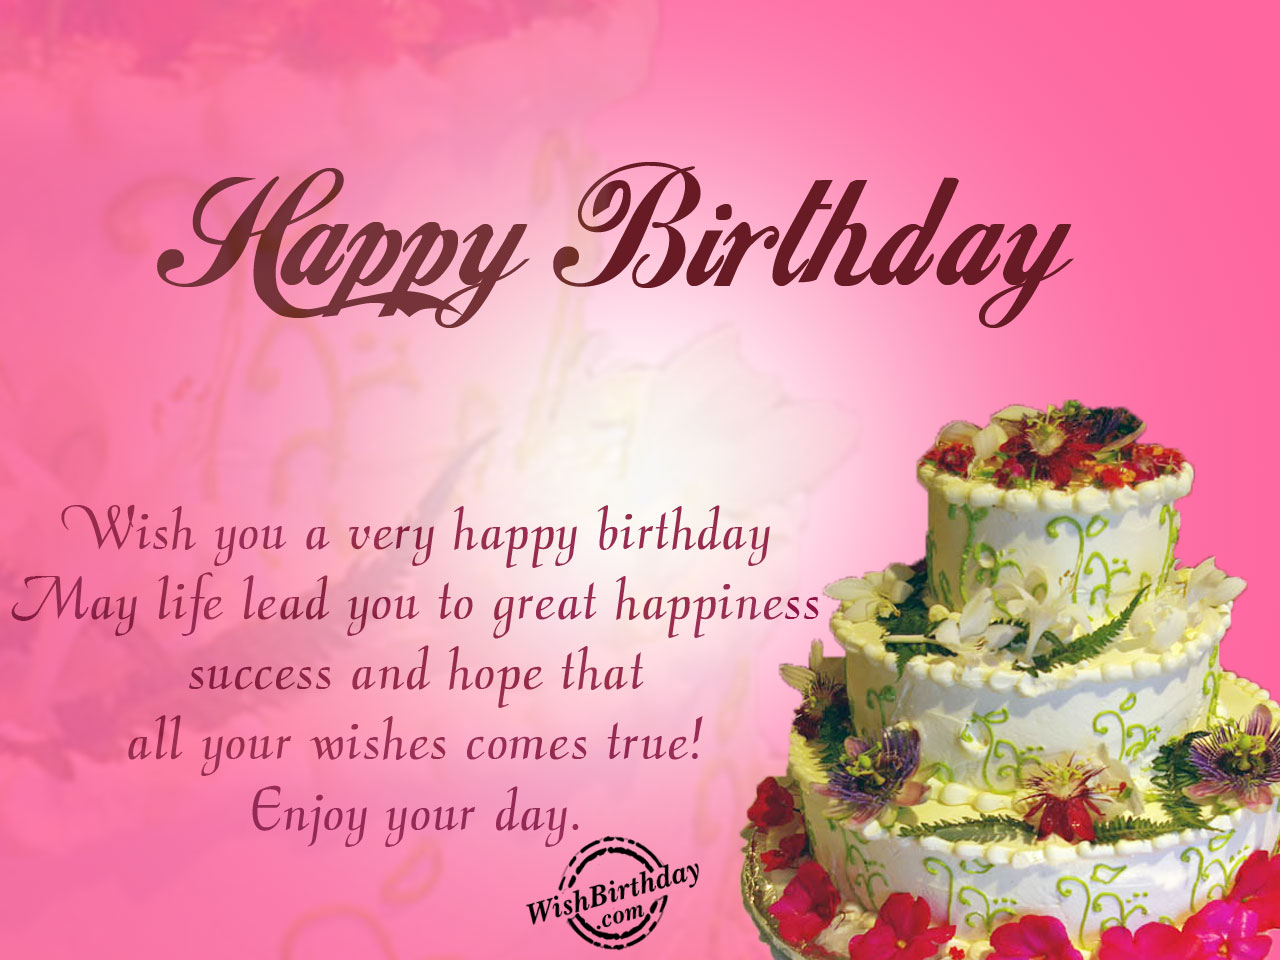 Wish you a very happy birthday, May life lead you to great happiness succes...